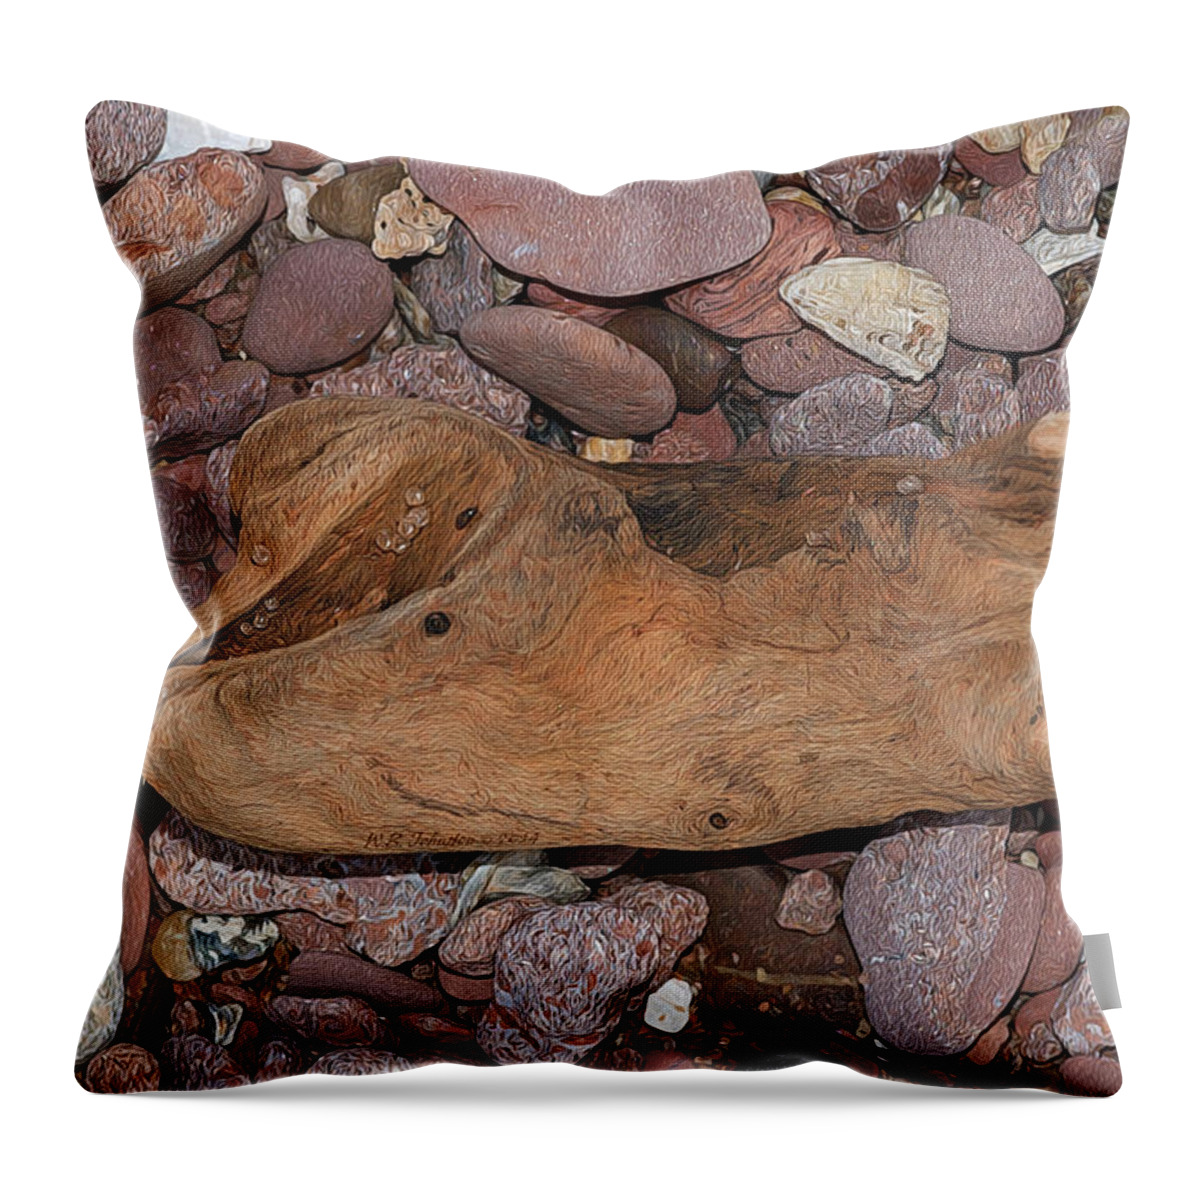 Rocks Throw Pillow featuring the photograph Beach Rocks 16 by WB Johnston